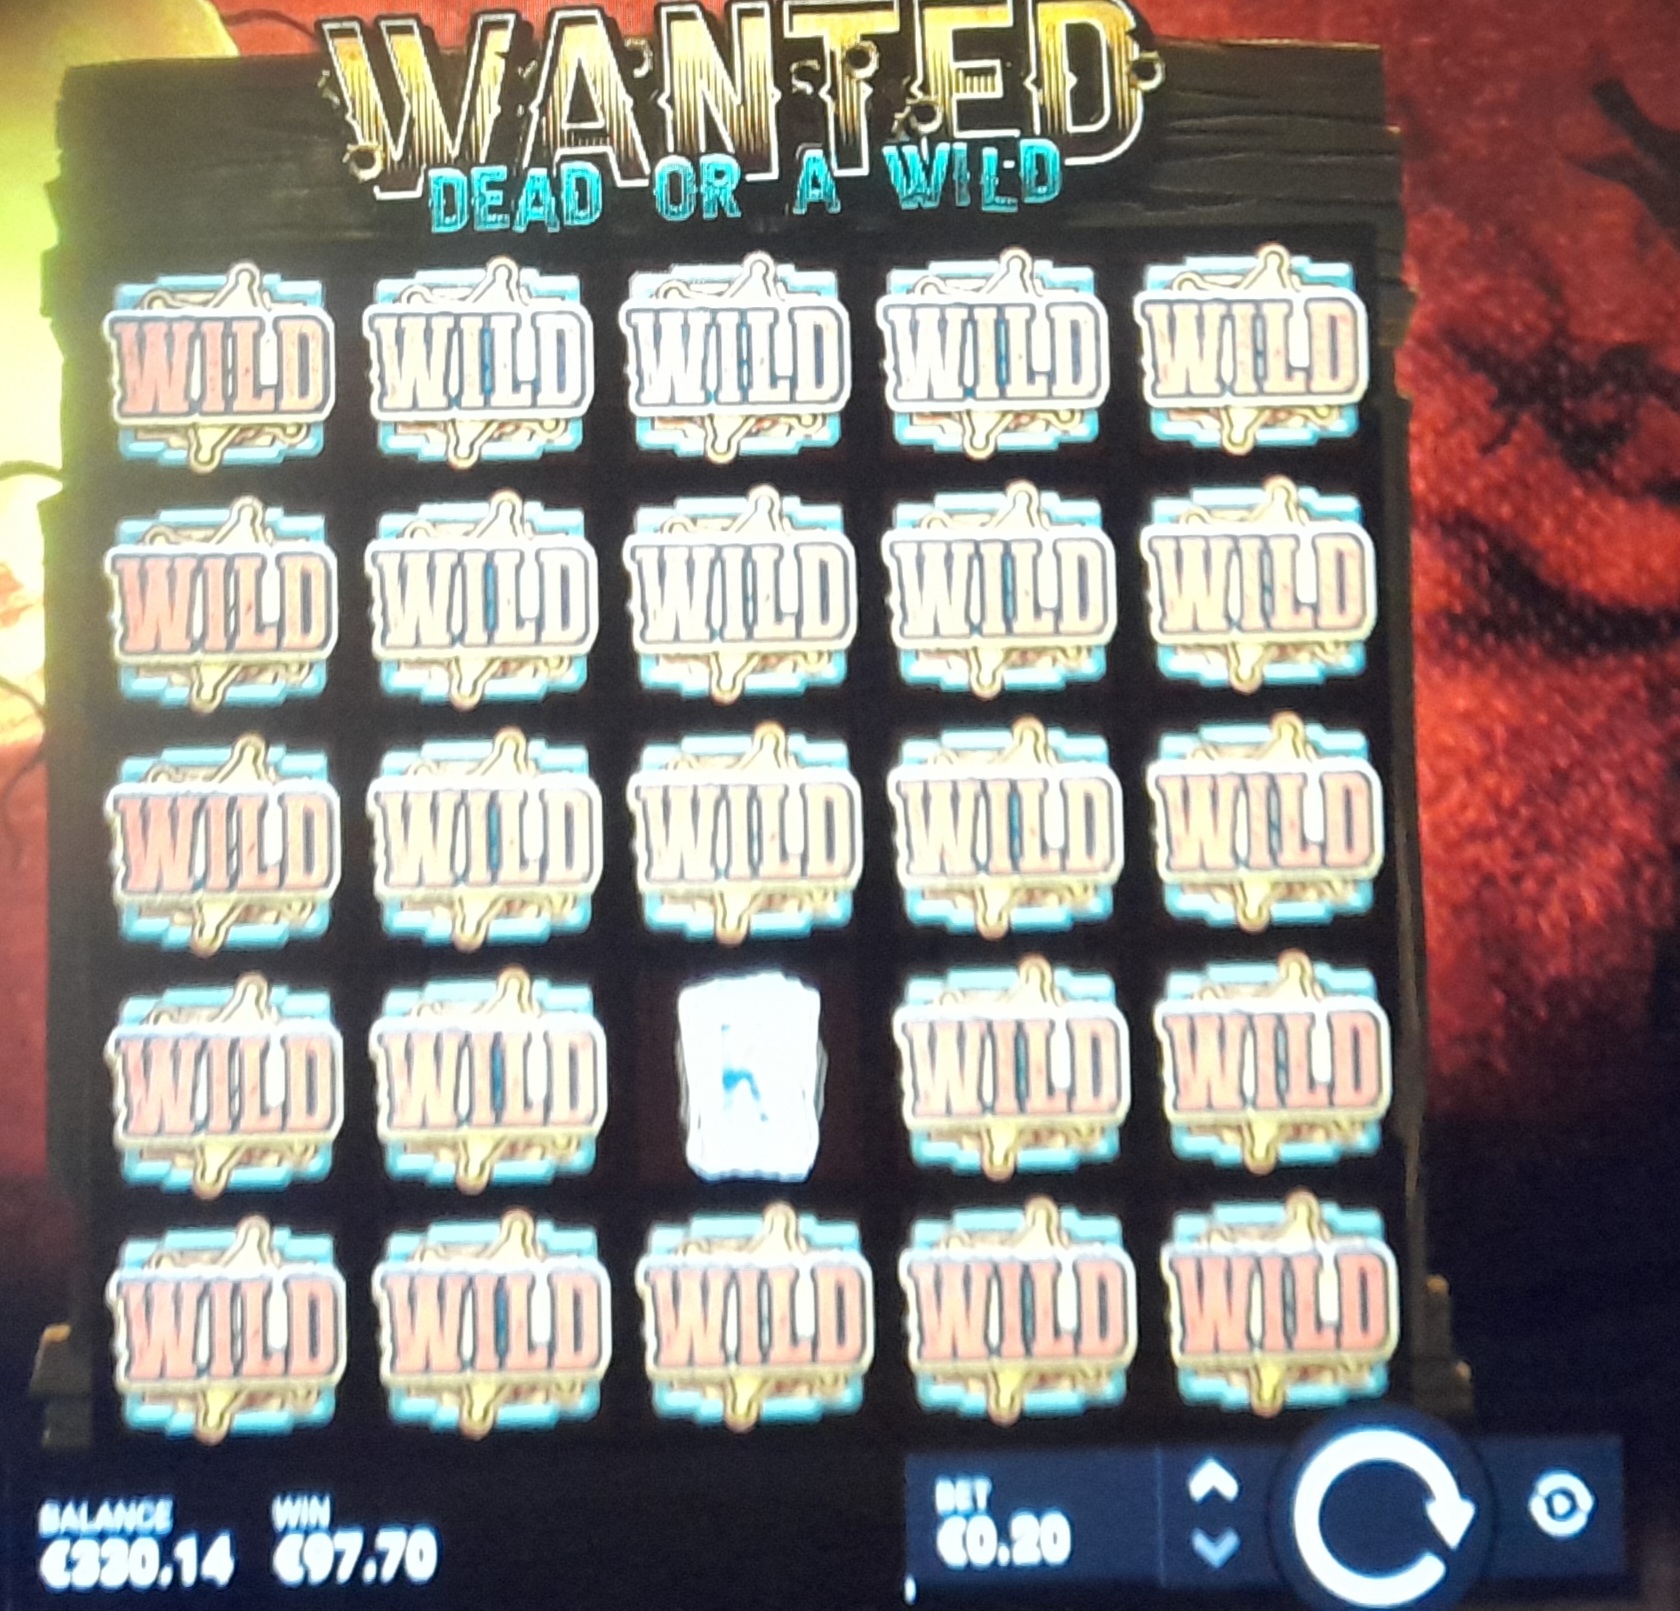 Wanted Dead or a Wild – UltraCasino（97.70 欧元/0.20 赌注）|尤格利1